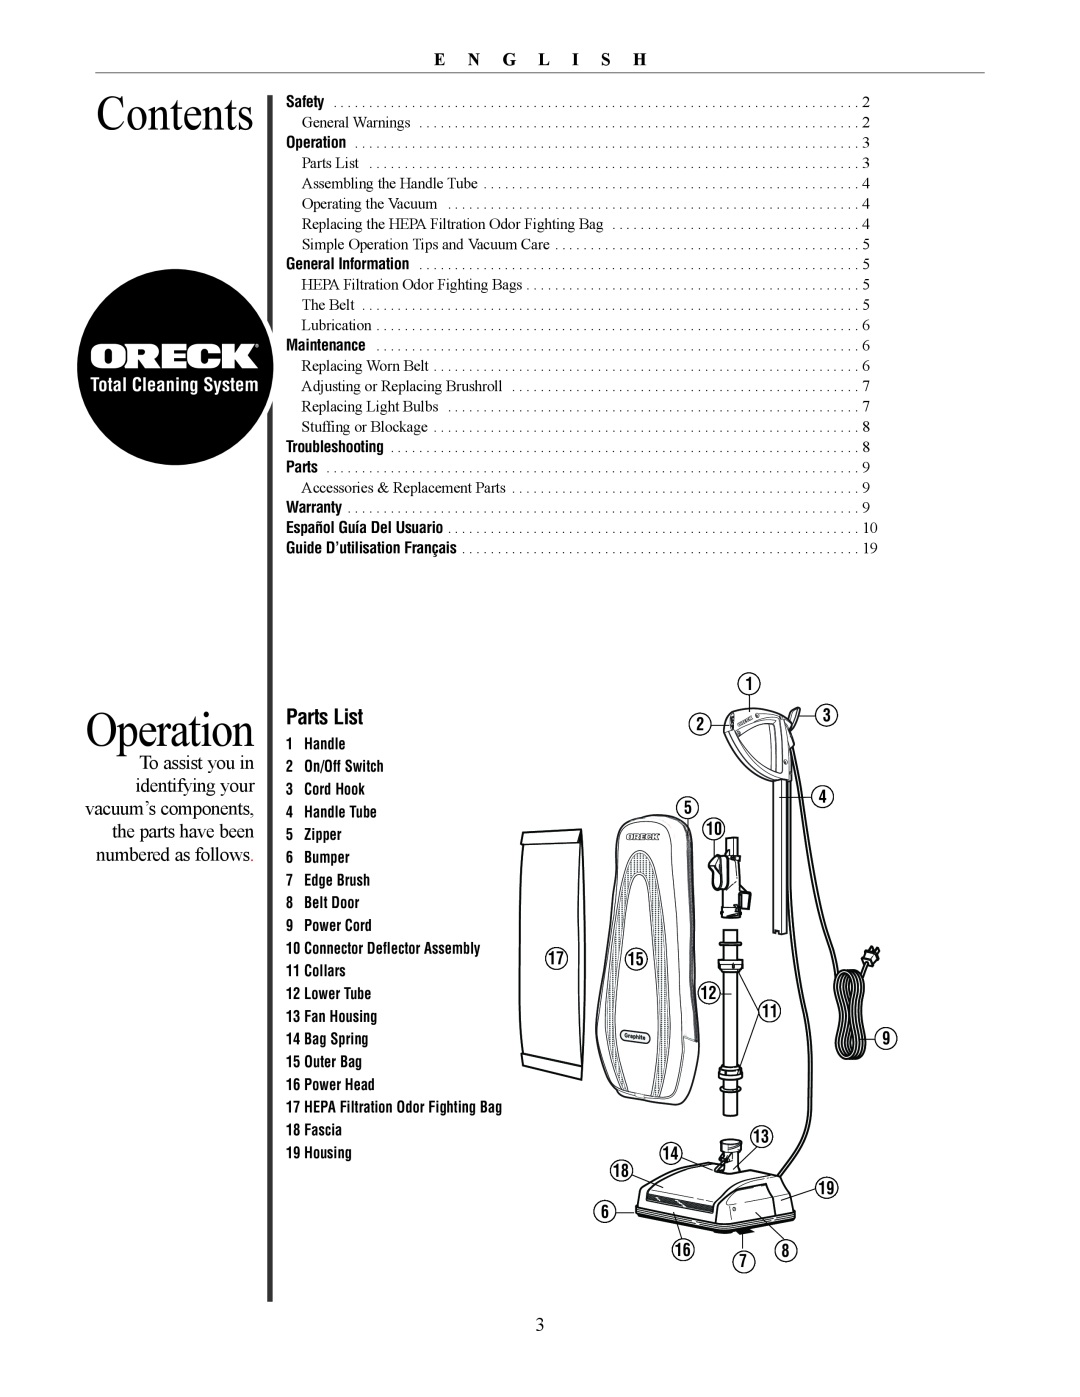 Oreck David manual Contents, Operation, E N G L I S H, Total Cleaning System 